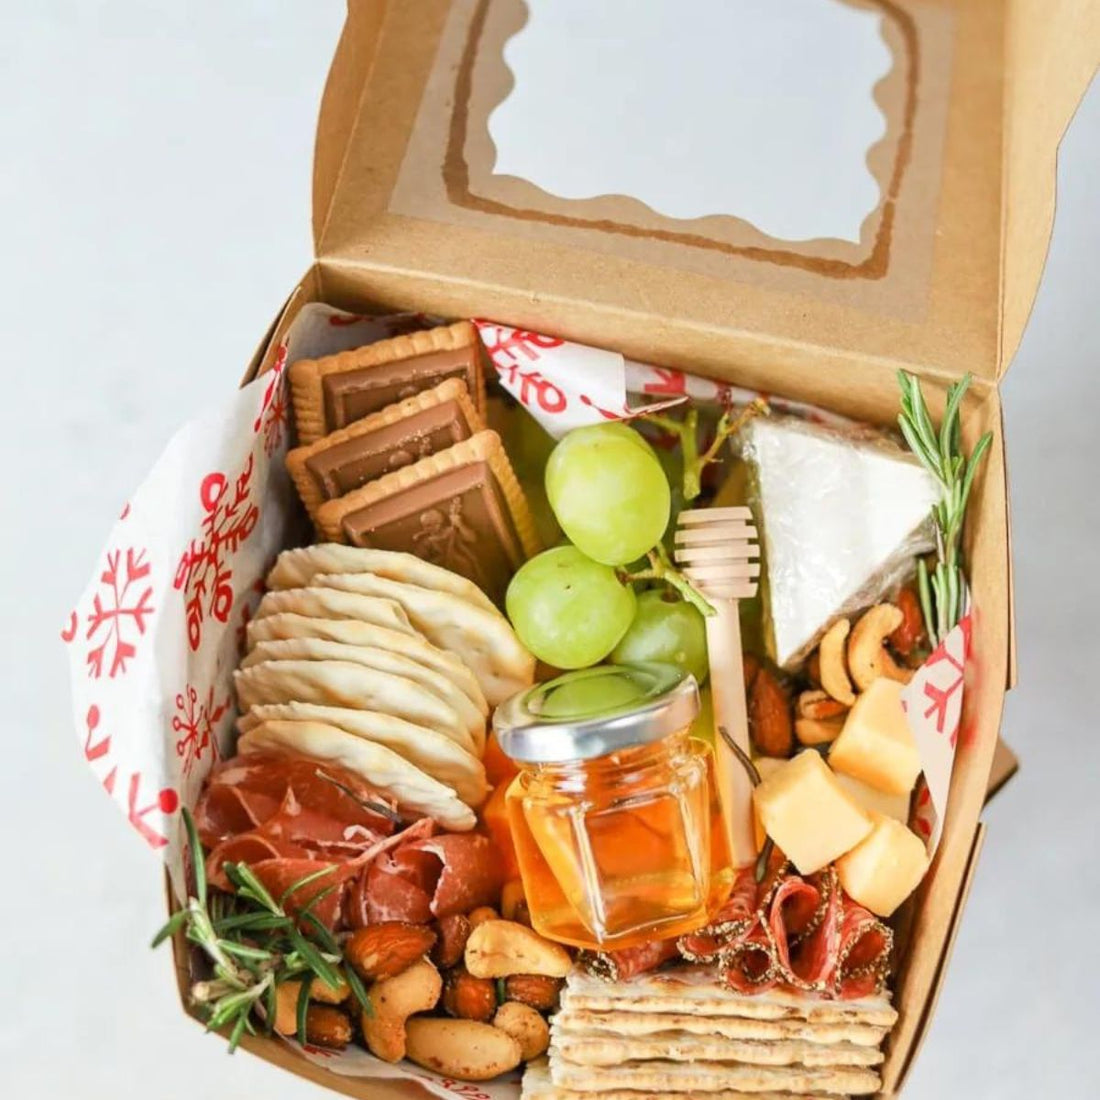 Charcuterie Box - How to Make One Perfect For Gifting